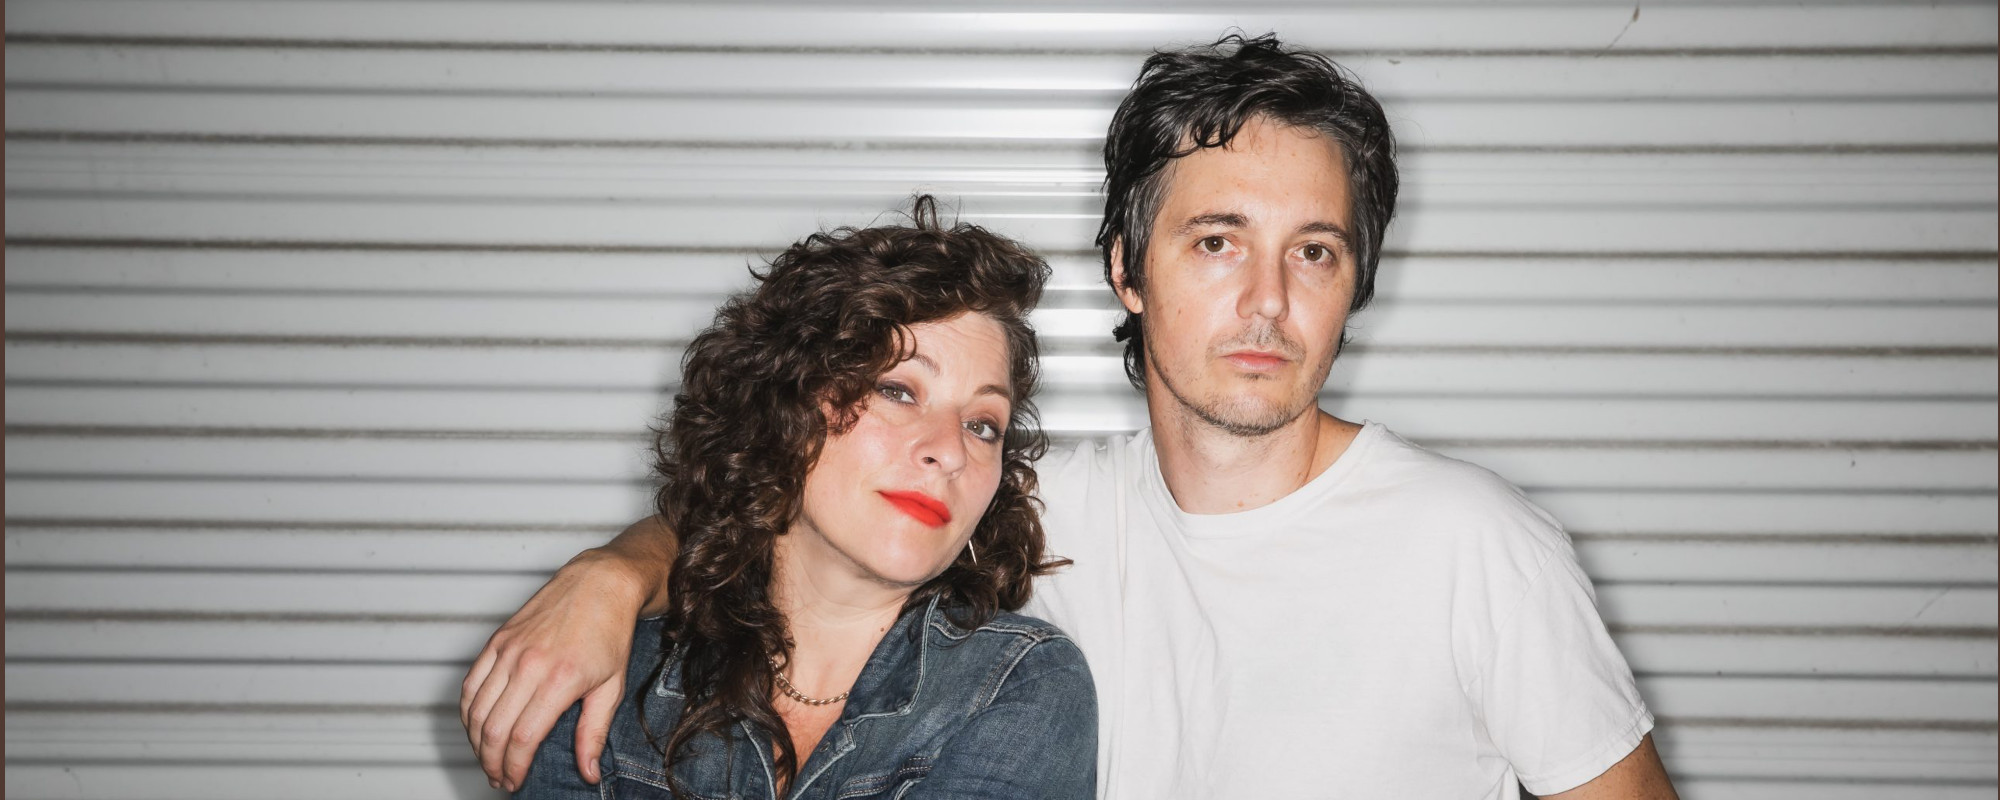 Review: Shovels & Rope Attempt to Achieve Optimism